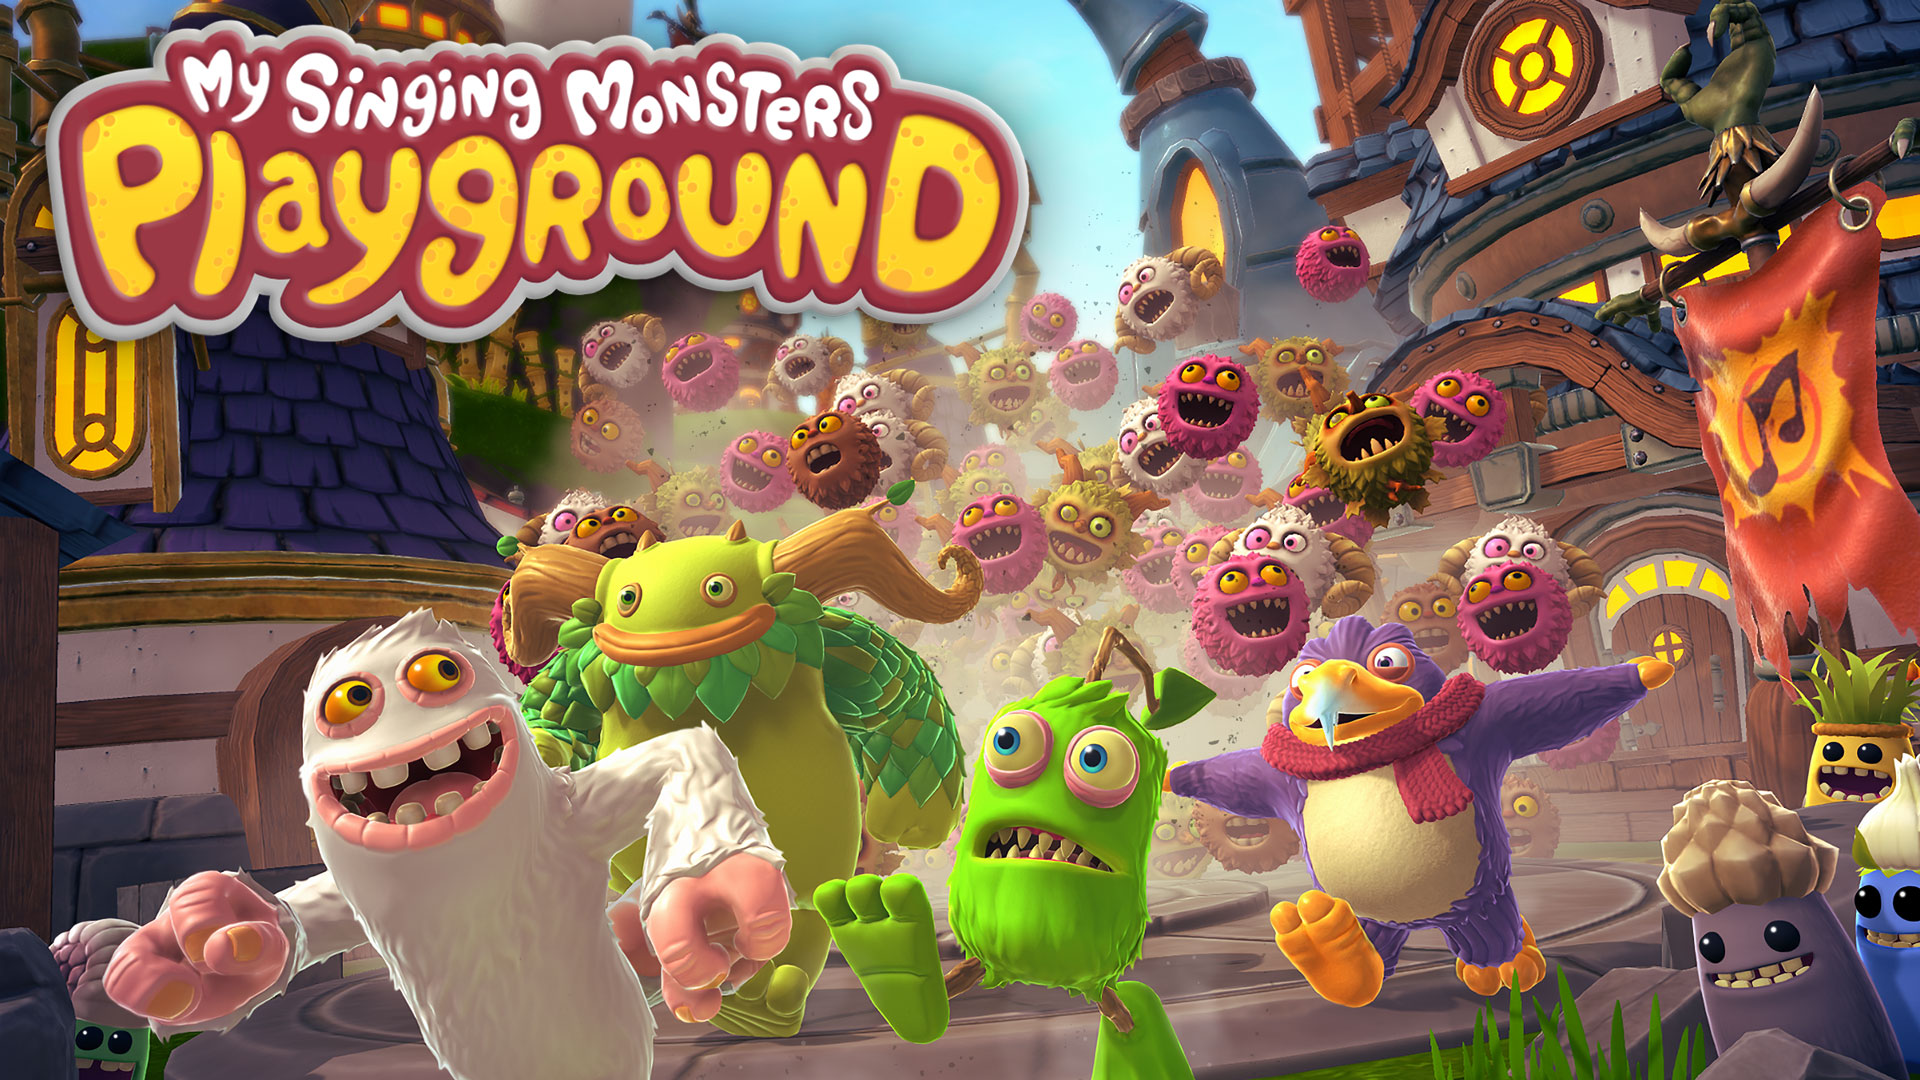 It's the Singing Monsters Like You've Never Seen Them